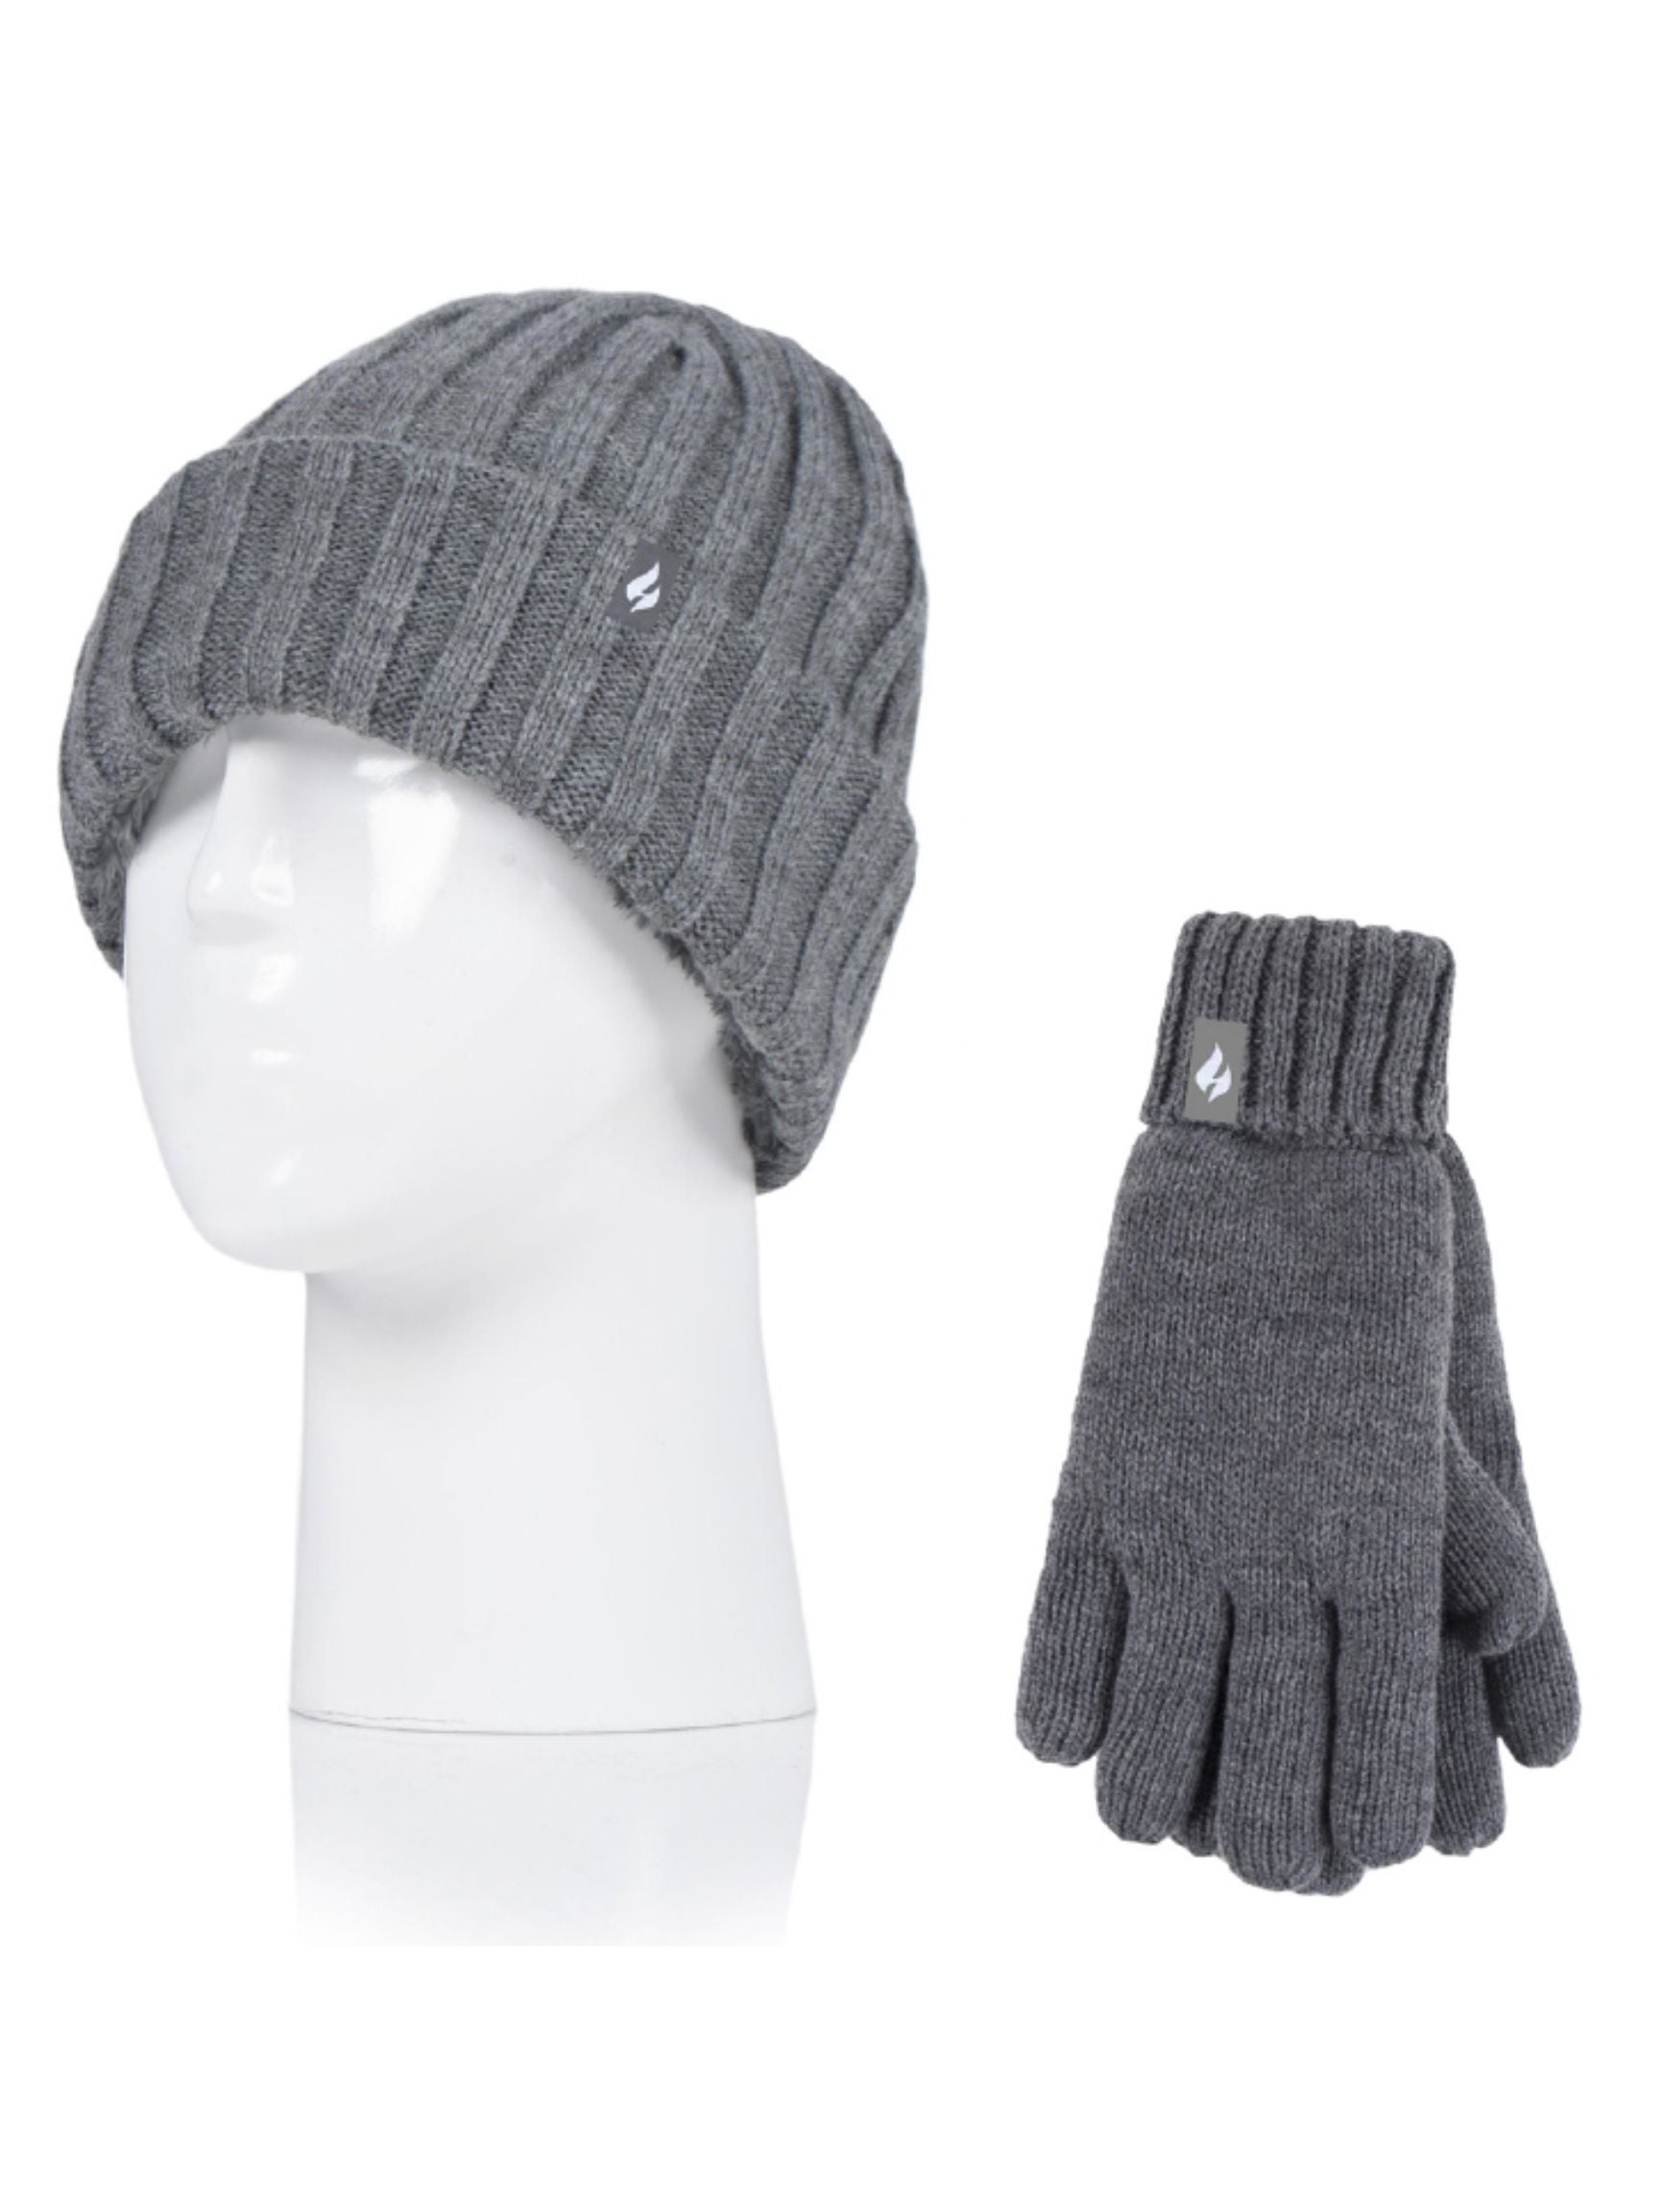 HEAT HOLDERS Open Road Ribbed Turn Over Thermal Beanie and Gloves-Boys 7-10 years